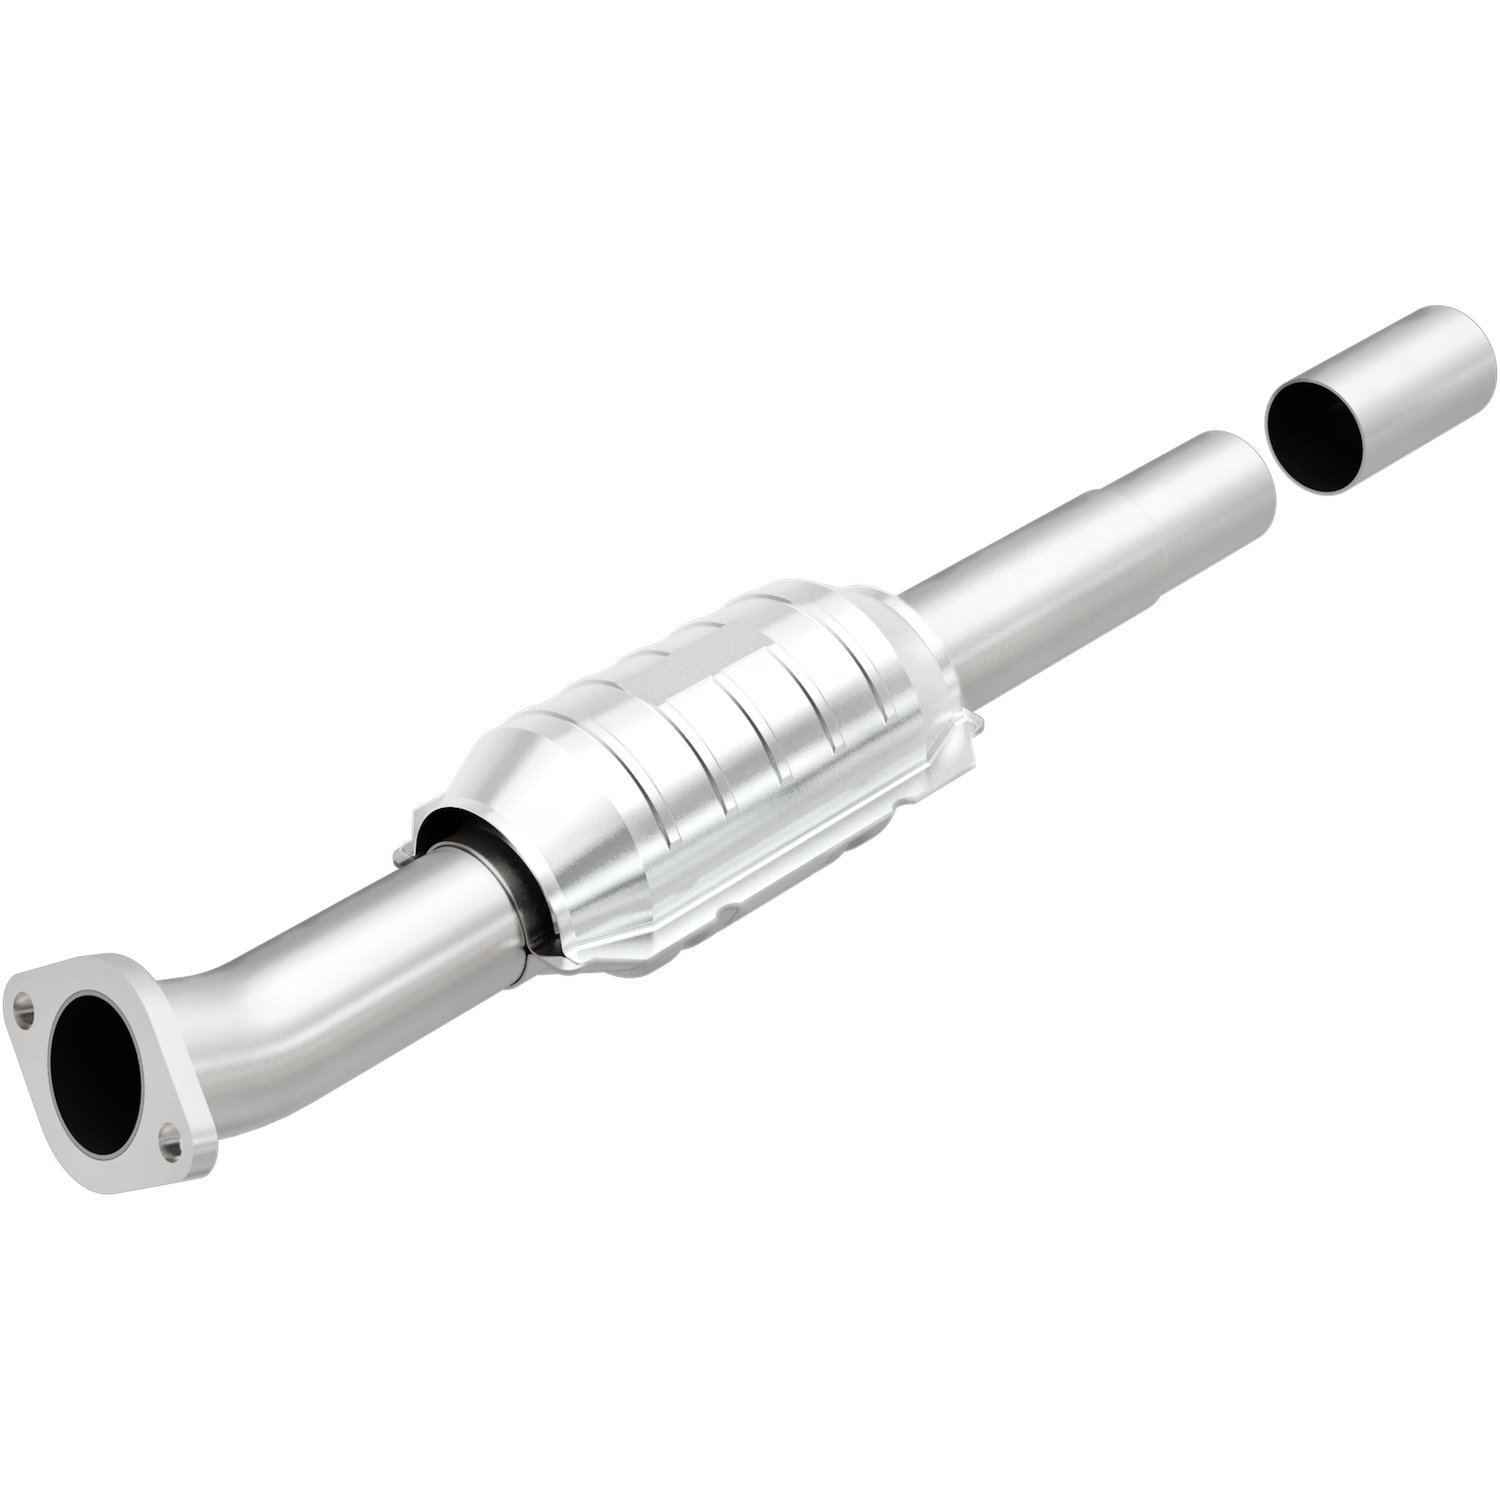 2004-2012 Mitsubishi Galant OEM Grade Federal / EPA Compliant Direct-Fit Catalytic Converter